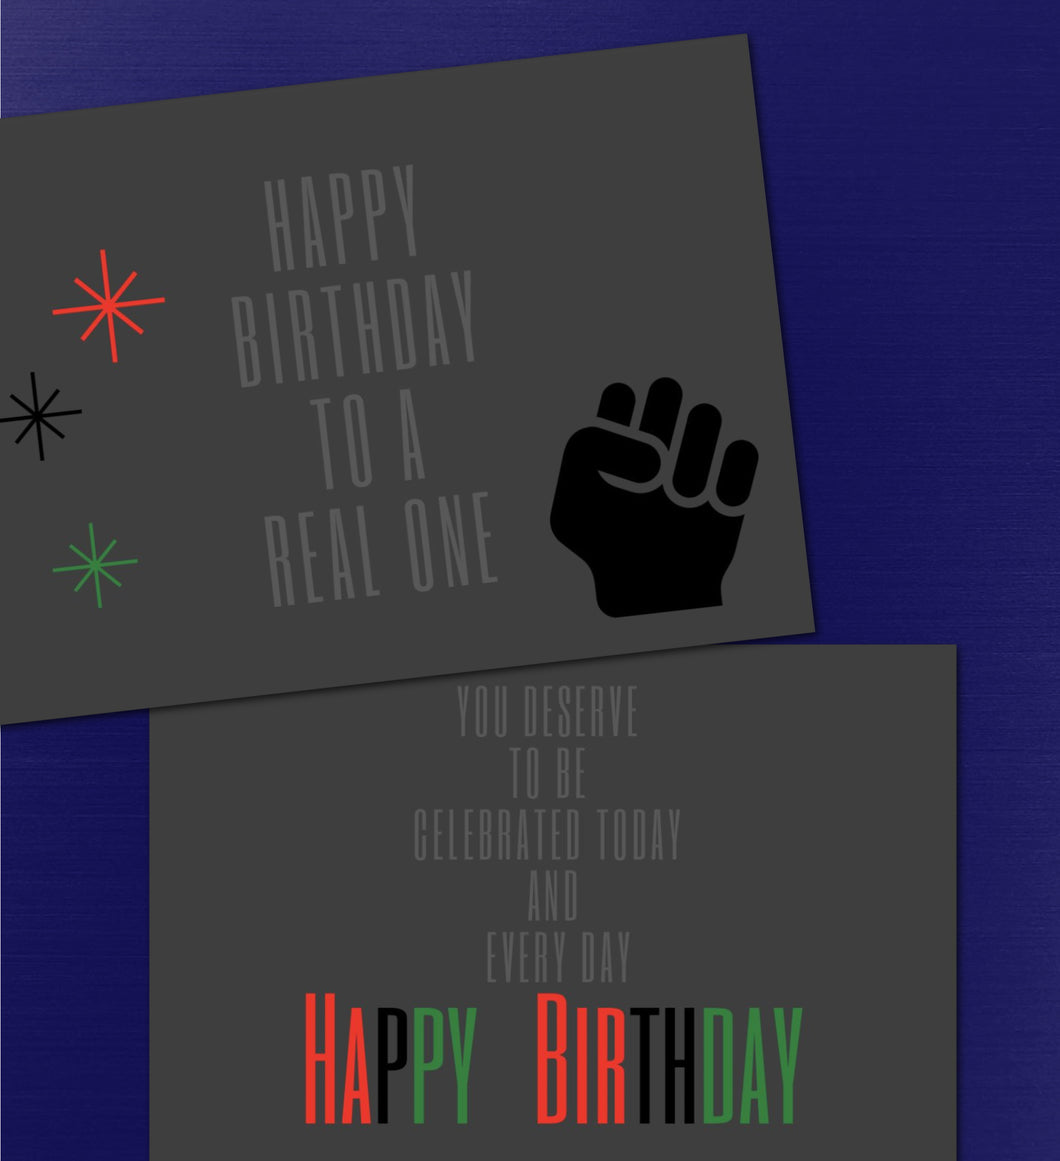 Red, Black & Green Real One Birthday Card